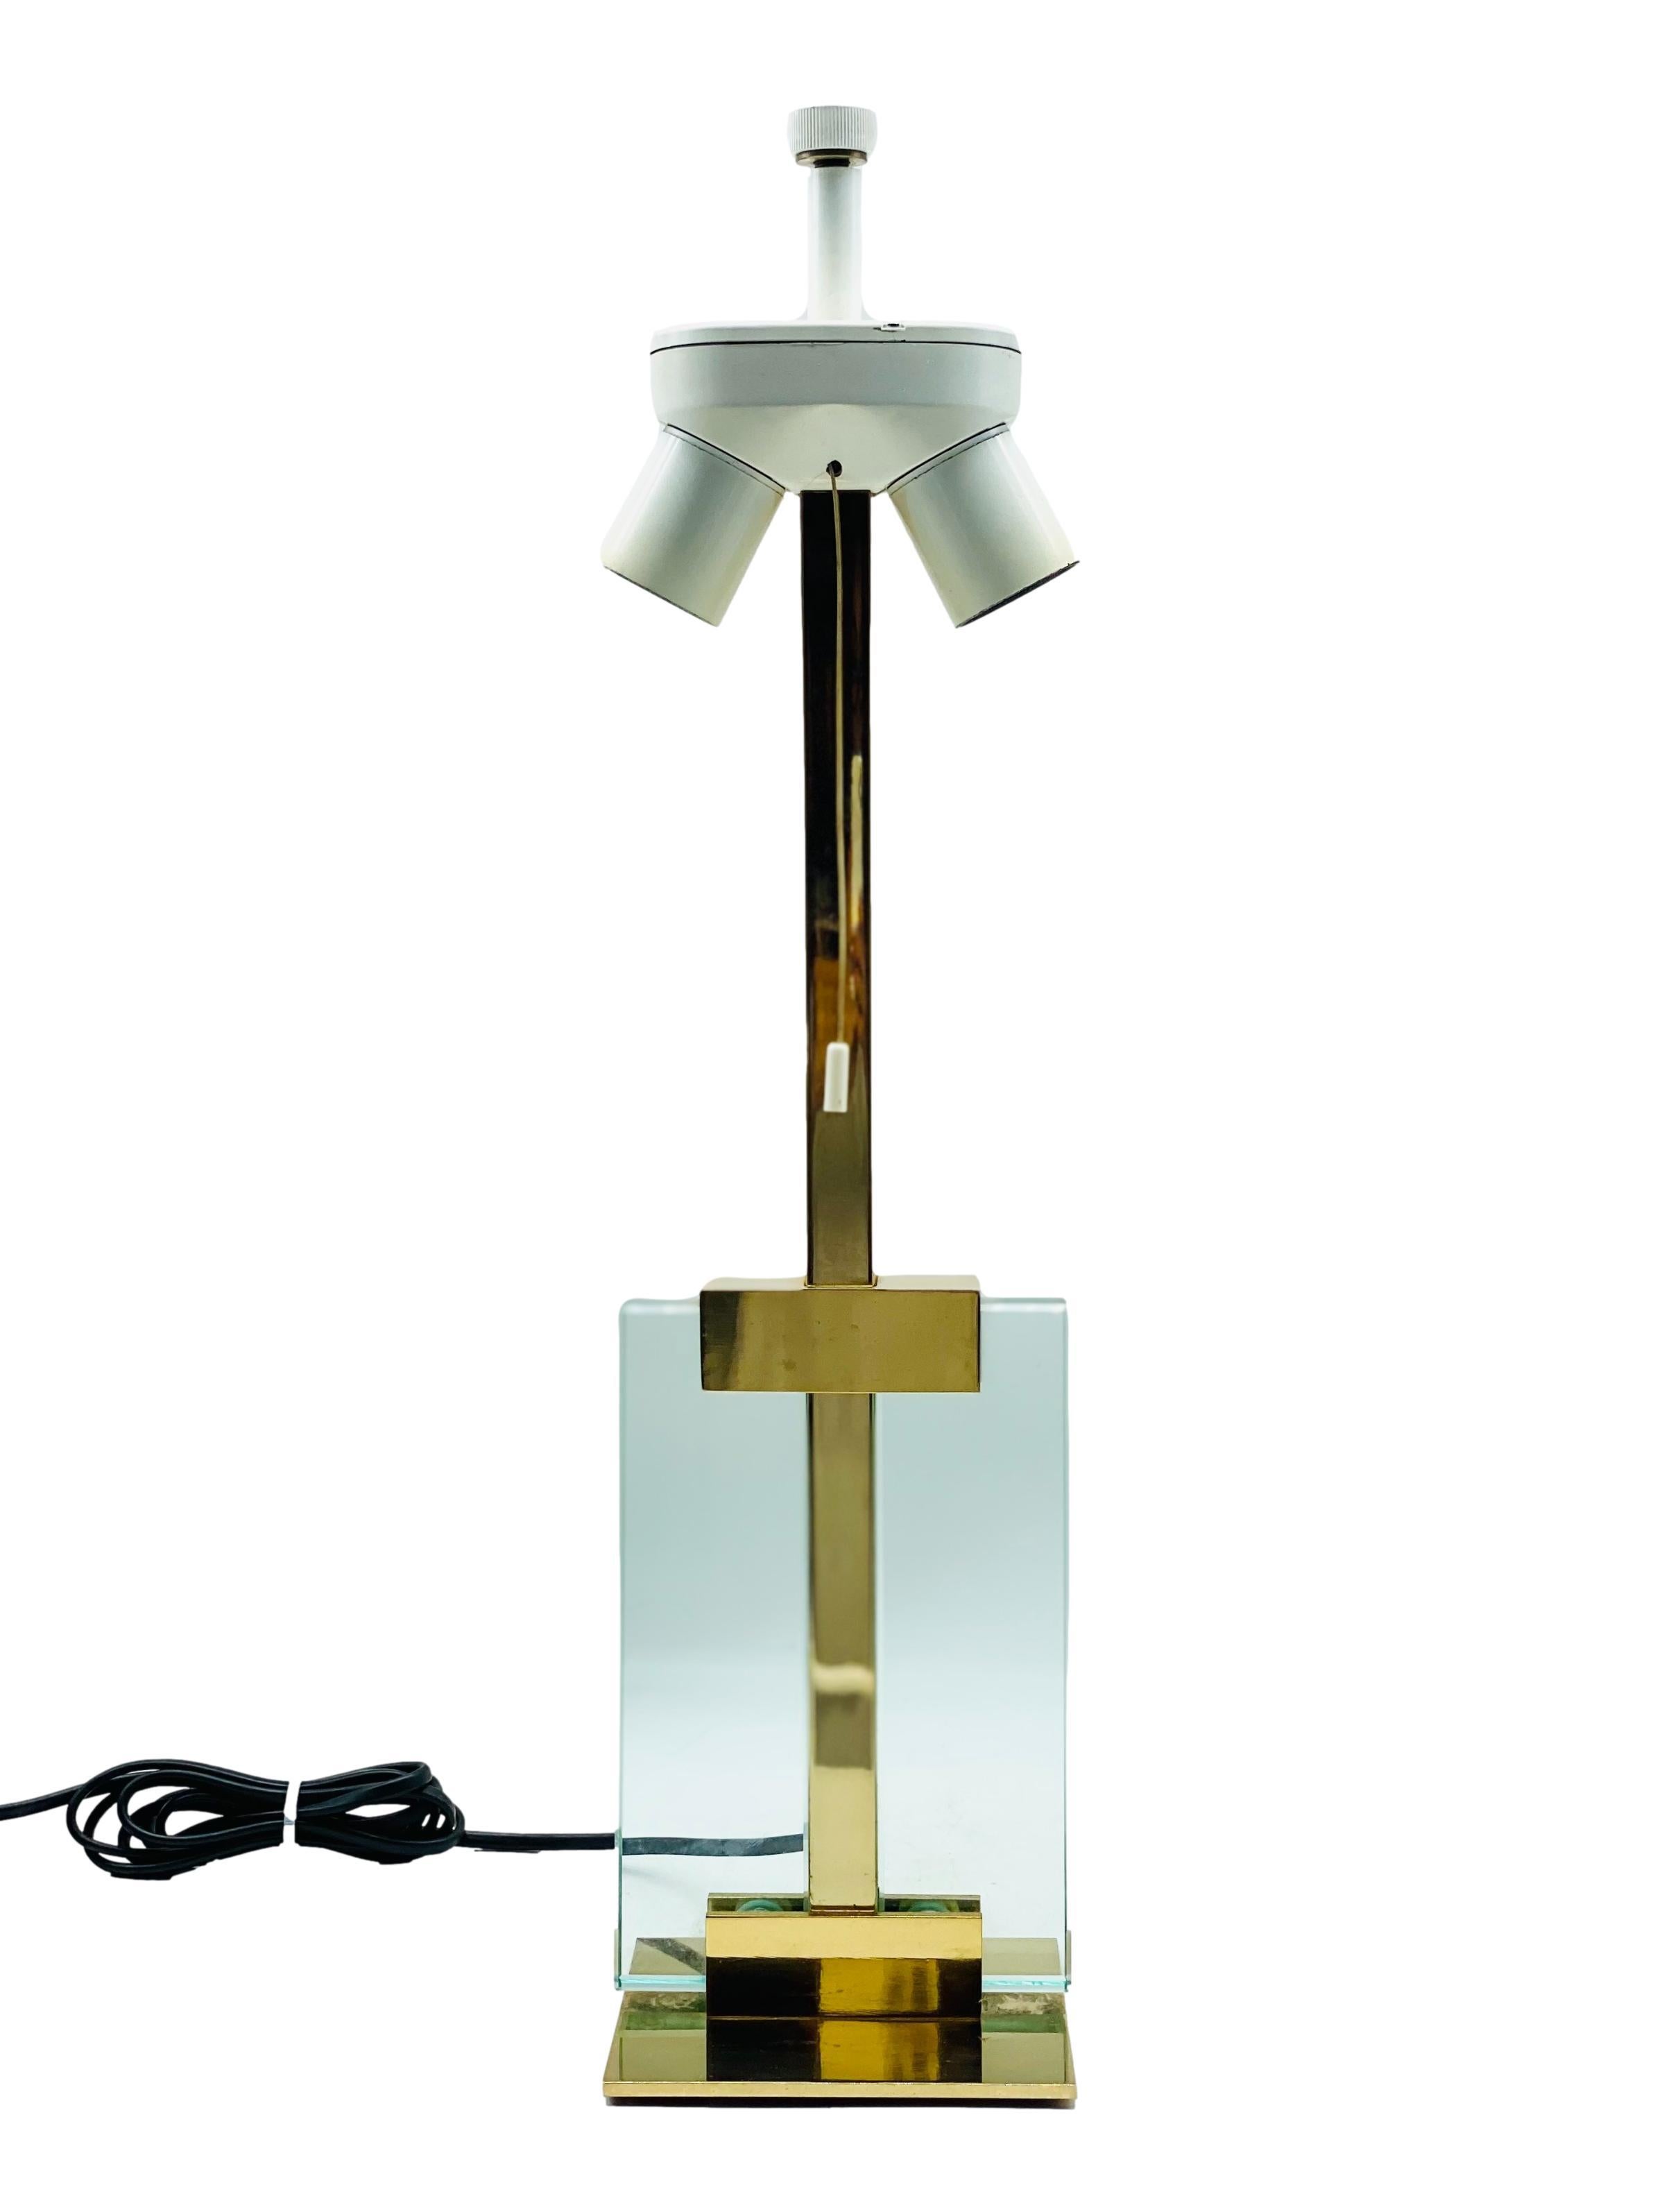 Elegant table lamp, very rare, Italy circa 1970, Murano glass construction, reduced to basic geometric shades, central arm in patinated brass surrounding two sheets of beveled pastel green glass, square brass base. In the style of Fontana Arte.